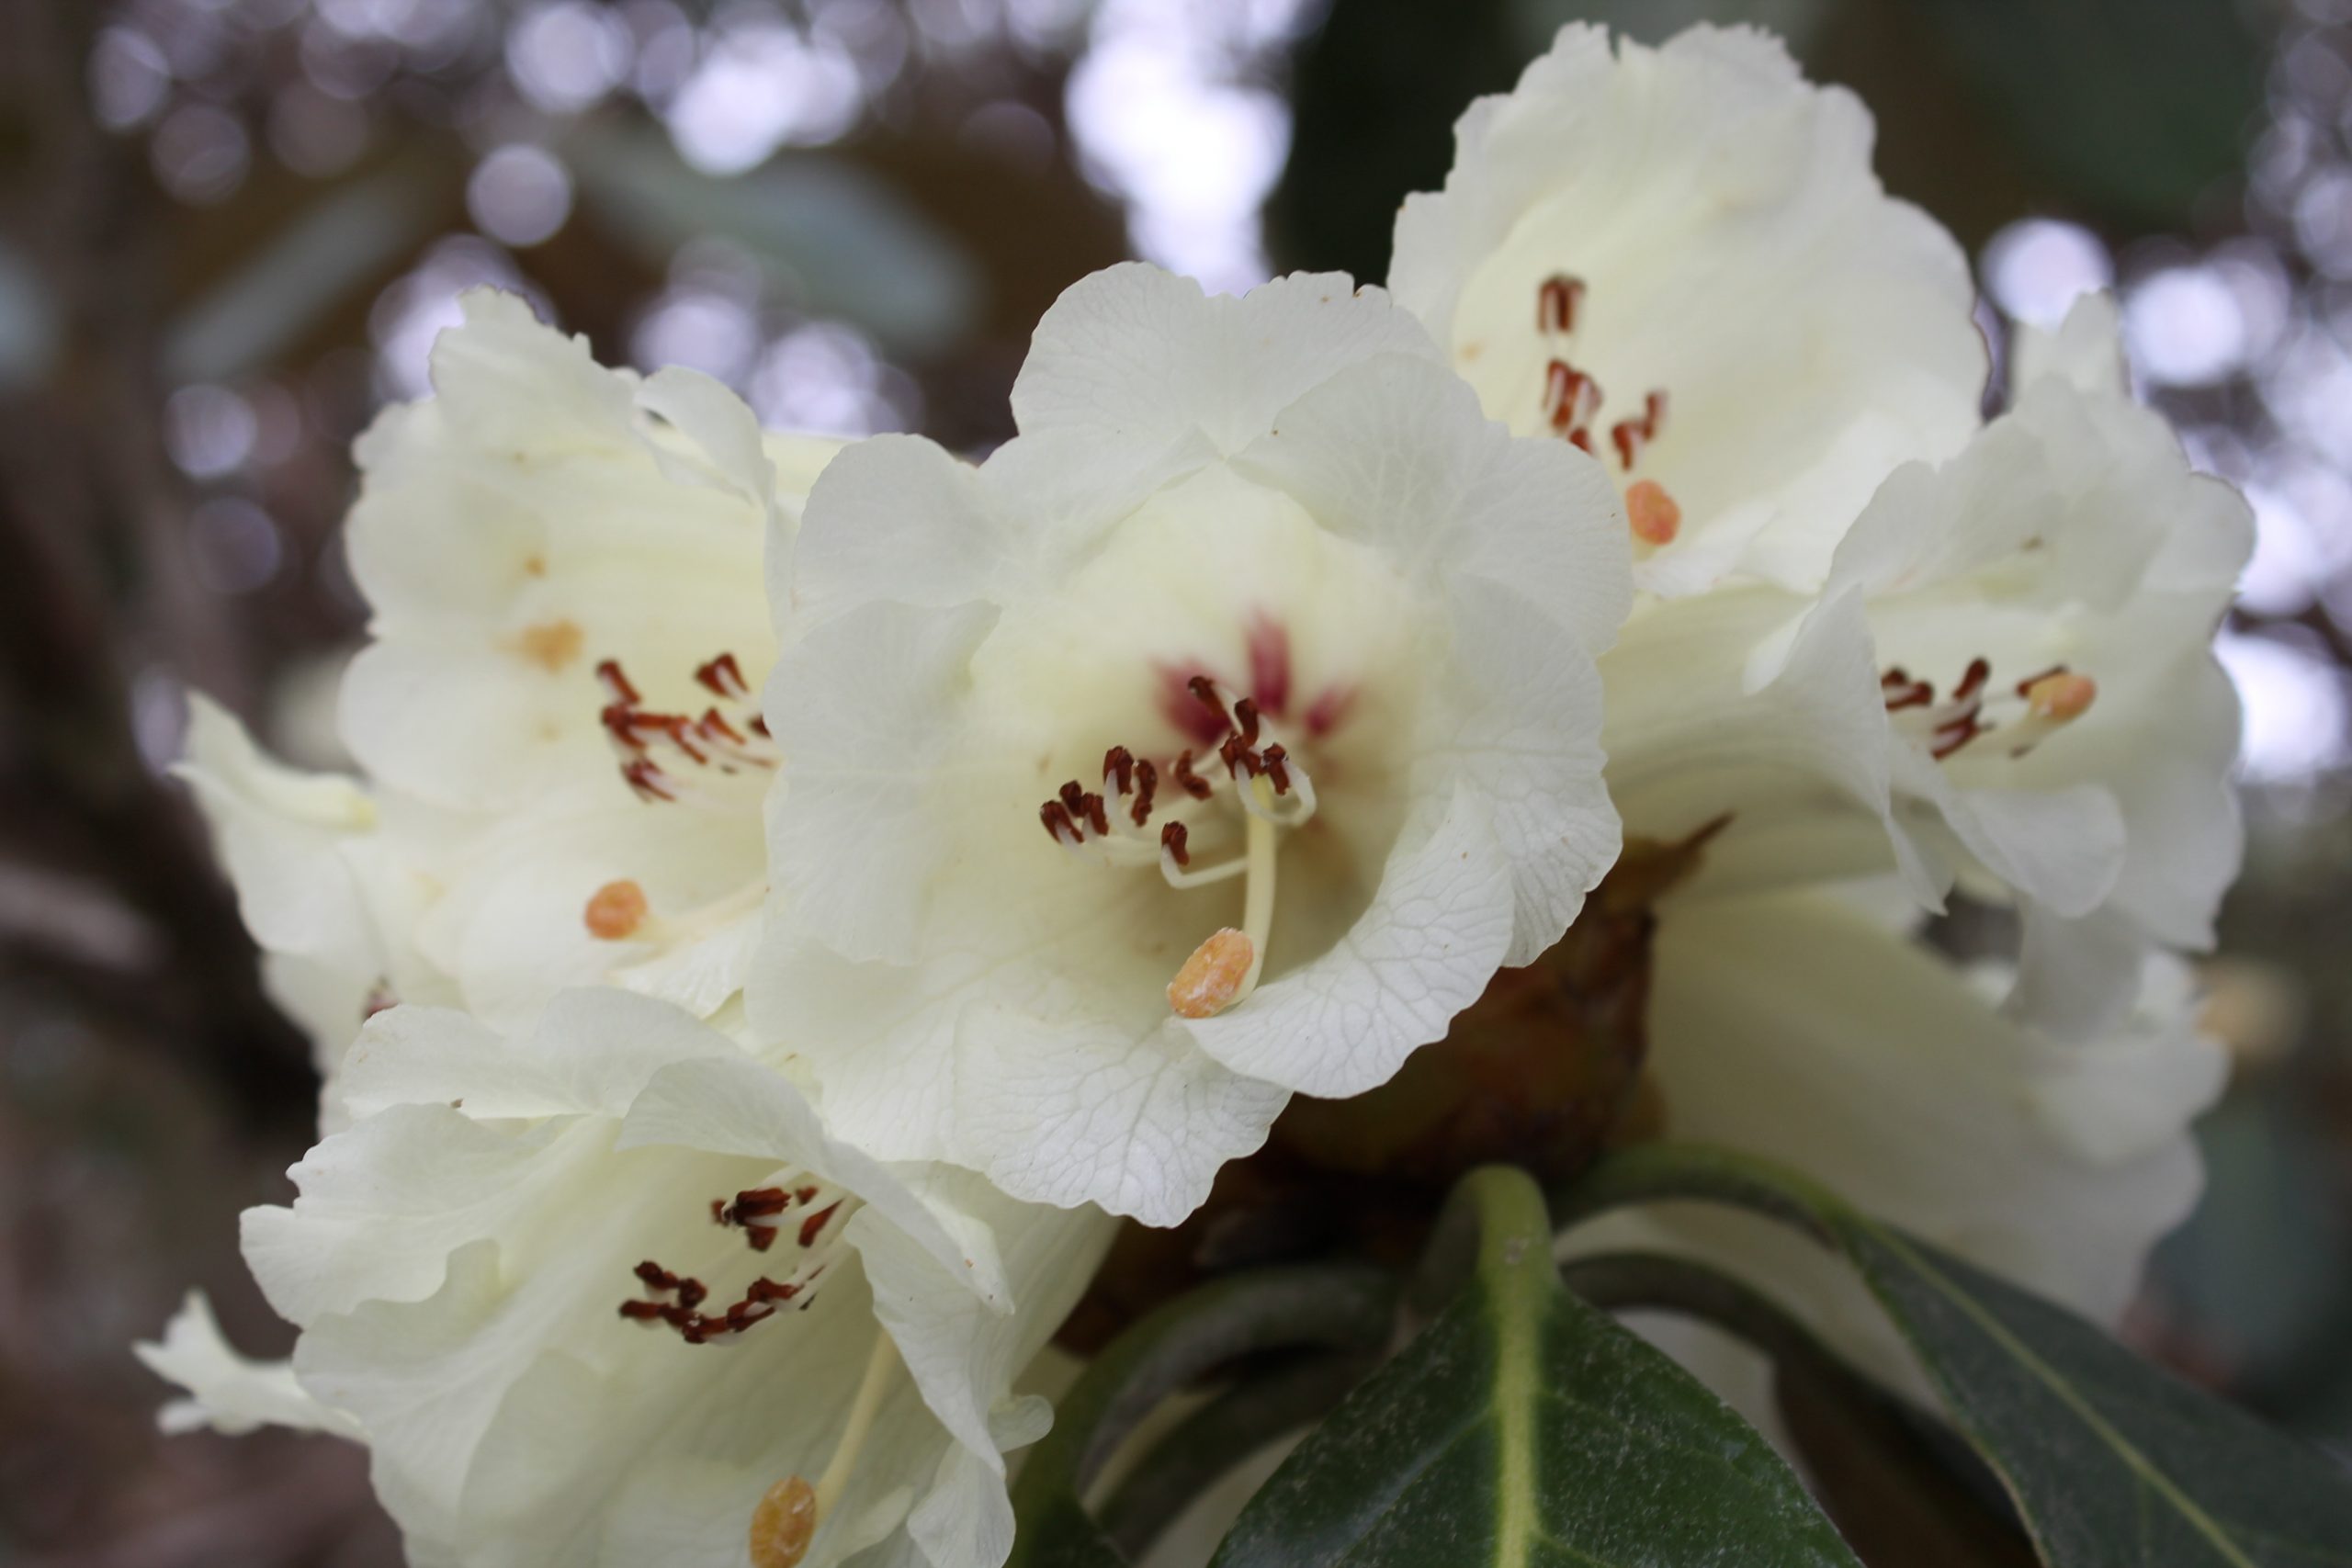 Rhododendron macacabeanum was introduced into the UK in 1927 and this is an original planting, now one of largest in the UK. Large silver green leaves and yellow flowers in early spring. Now endangered in the wild.